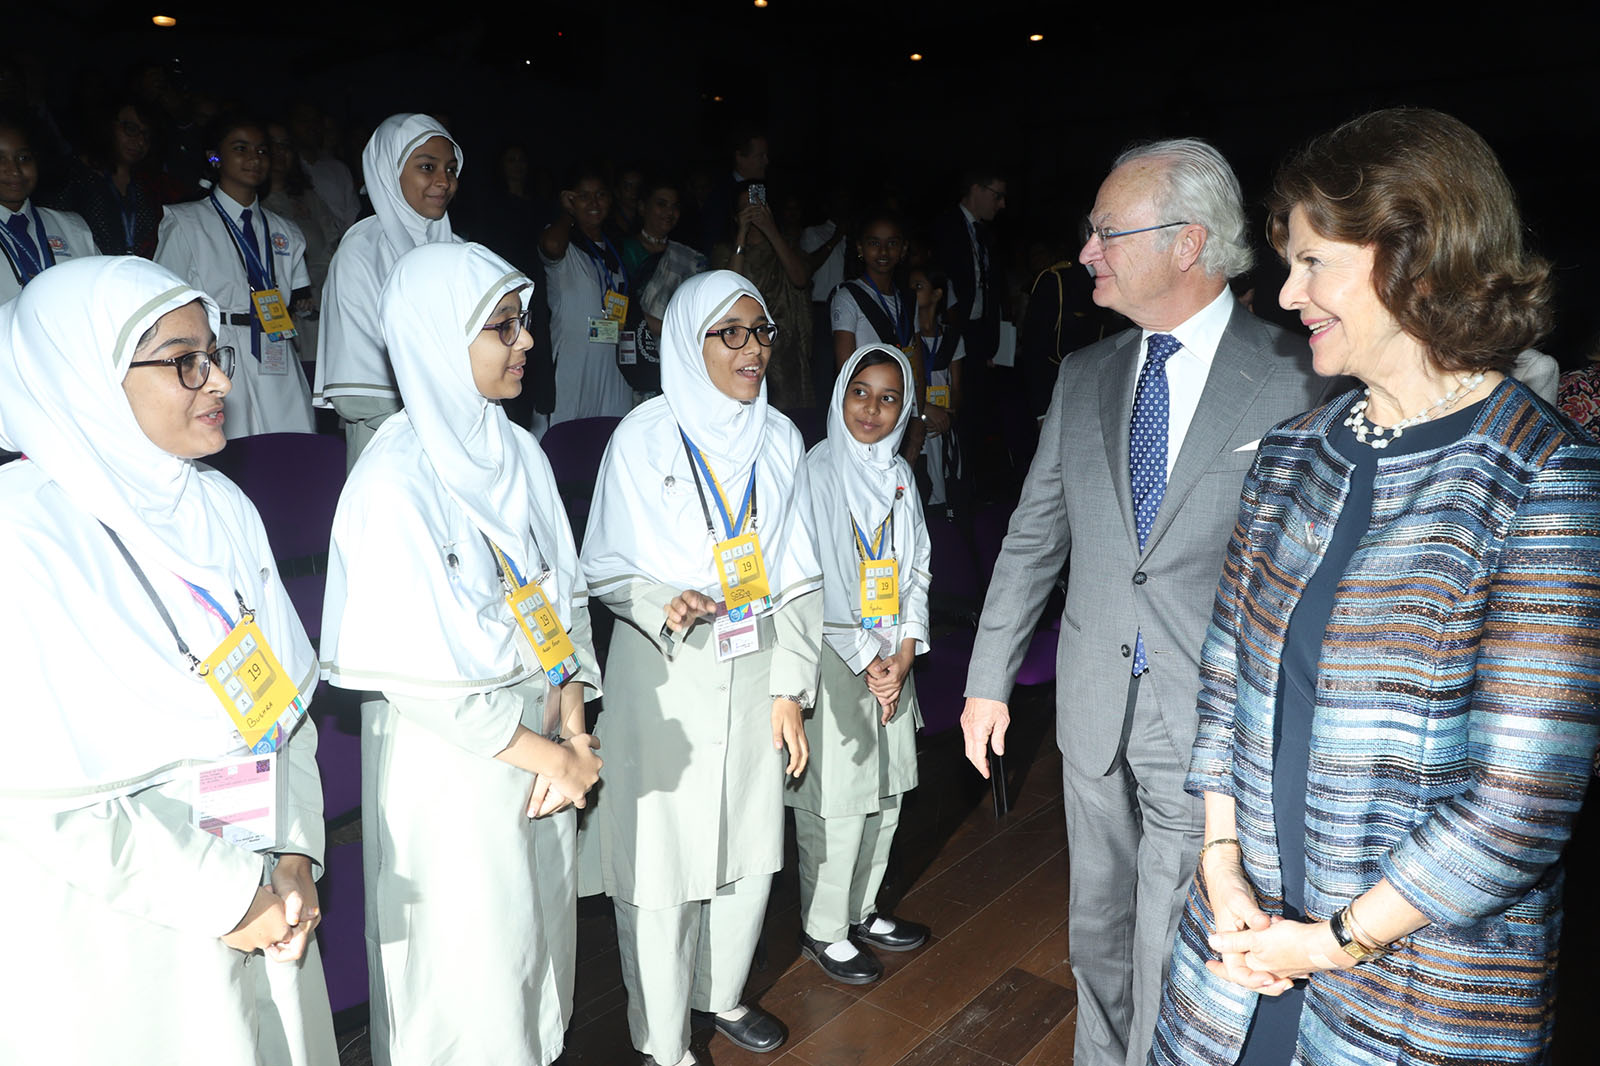 HM King Carl XVI Gustaf and HM Queen Silvia talks to four girls from the audience.